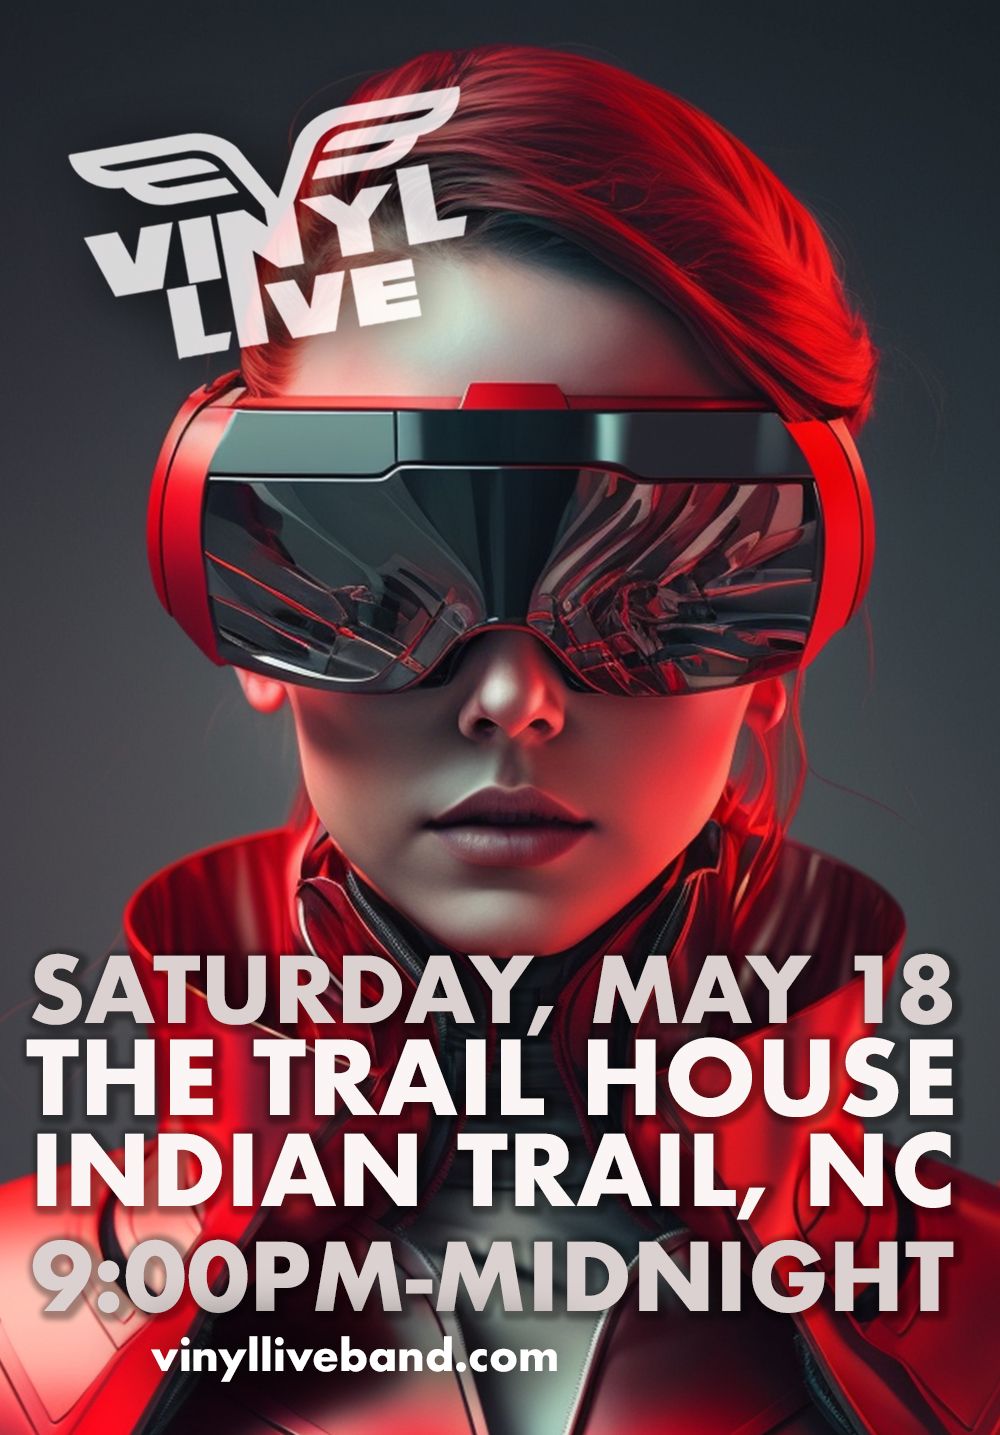 Vinyl Live returns to The Trail House